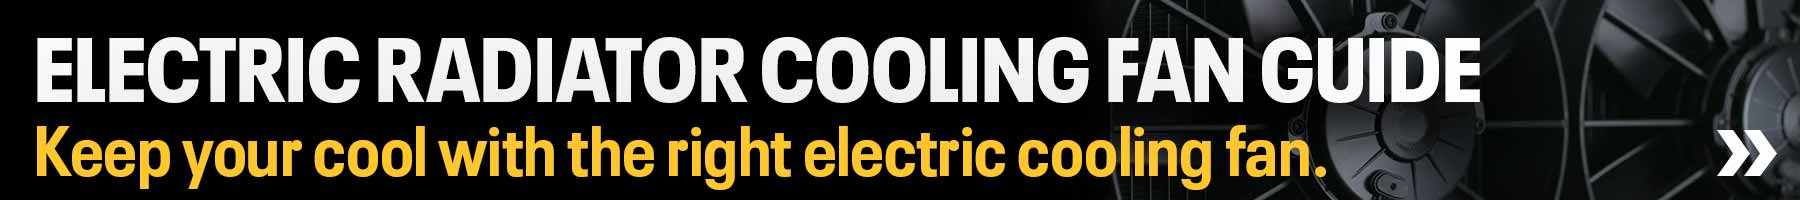 Electric Radiator Cooling Fan Guide Banner